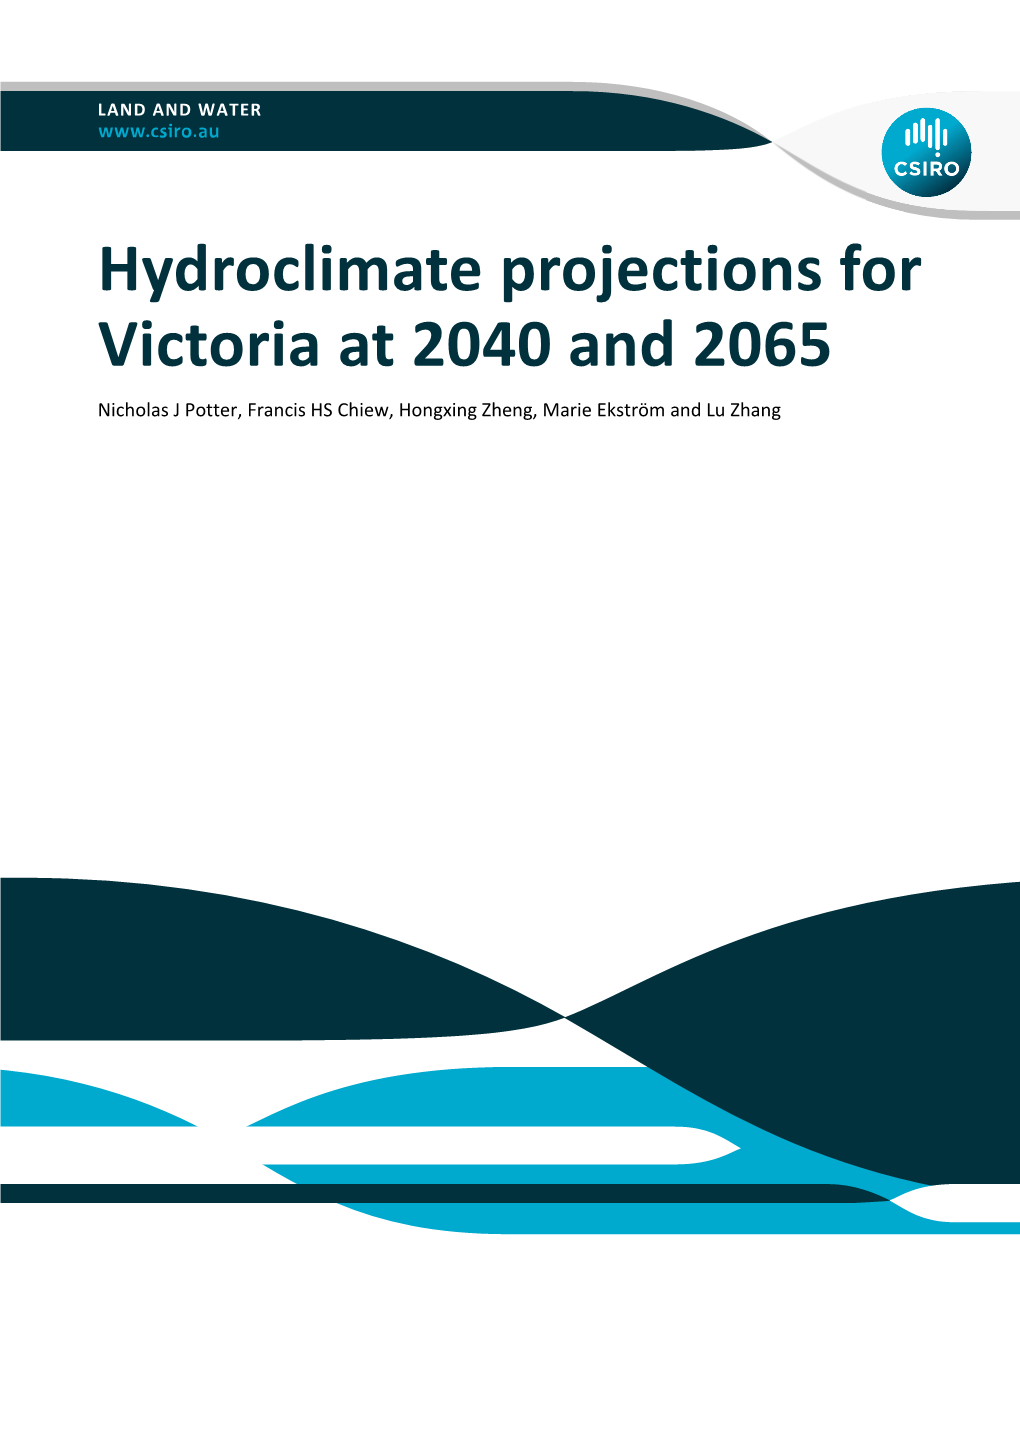 Hydroclimate Projections for Victoria at 2040 and 2065